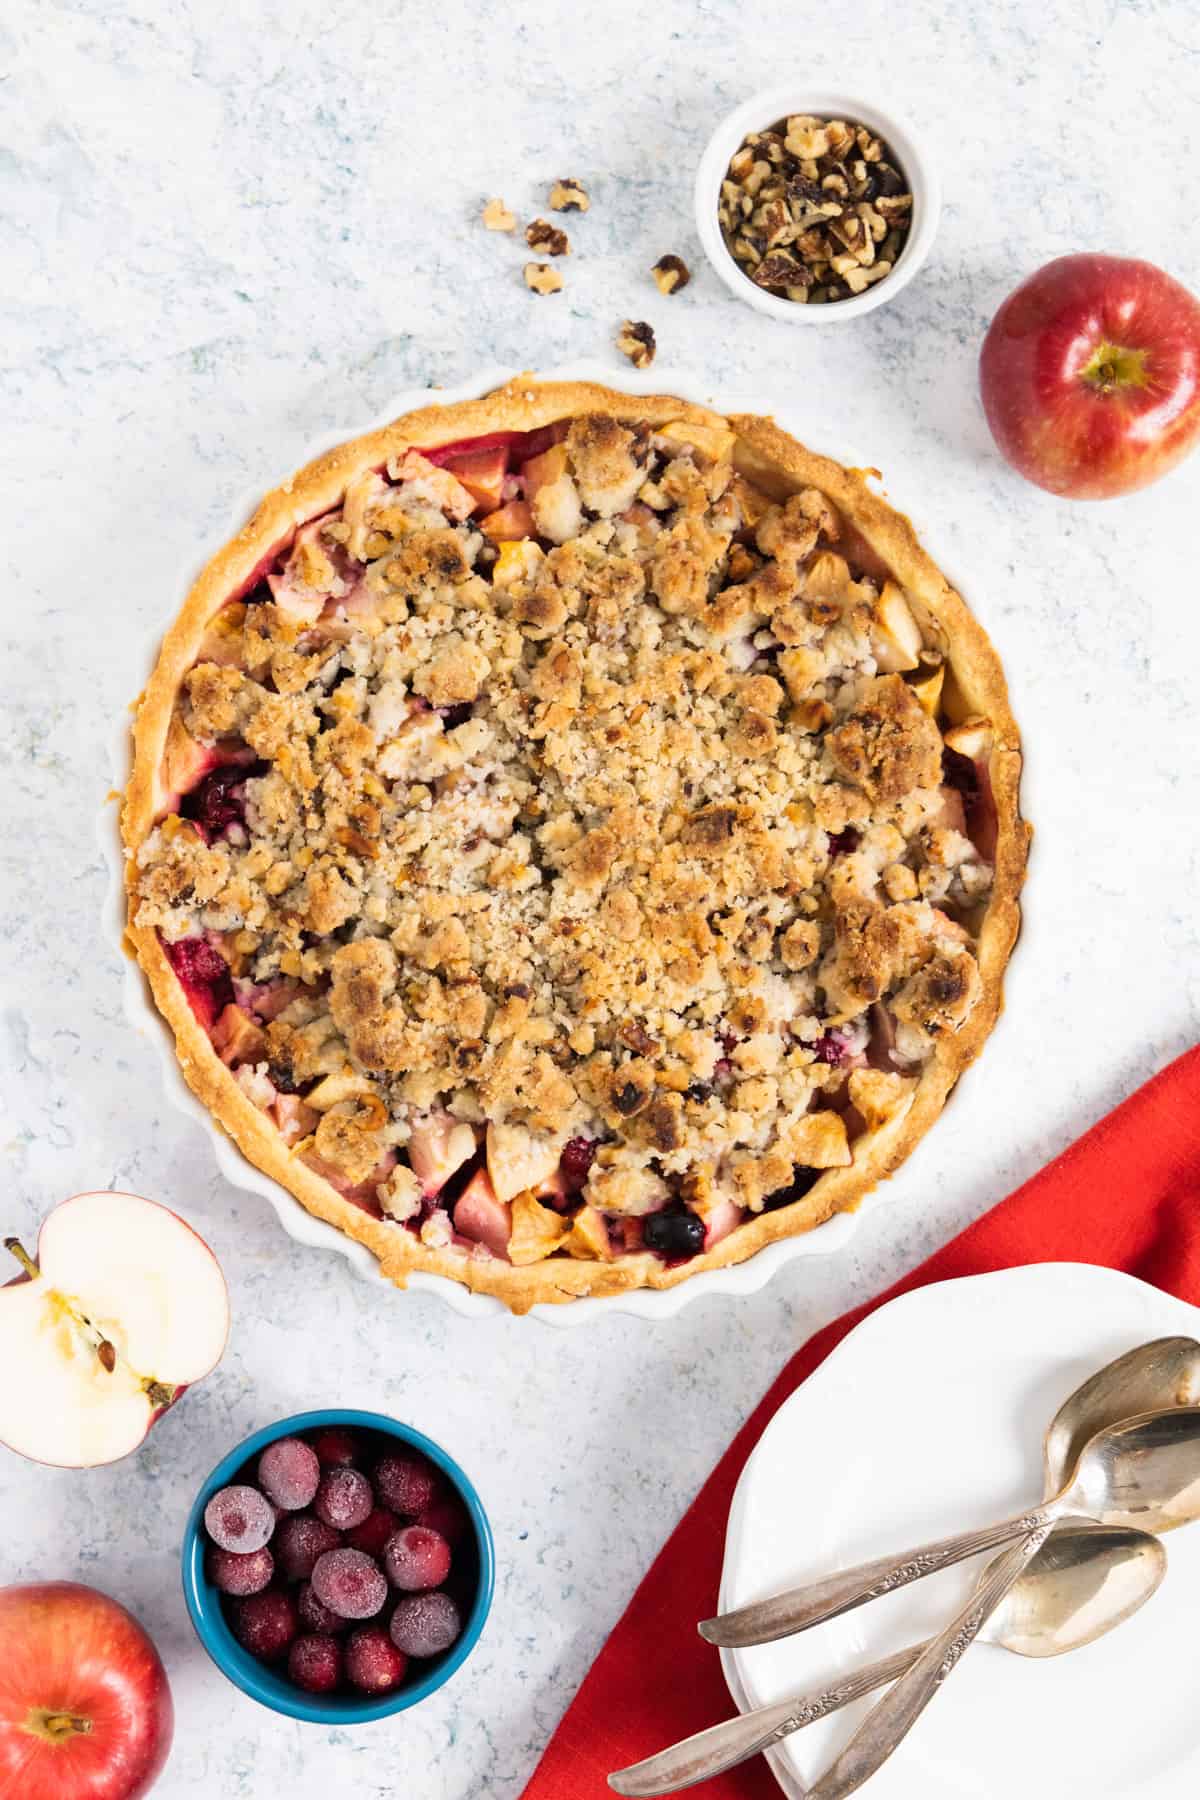 Top view of a baked apple crumble pie with ramekins on the side with walnuts and cranberries. A halved apple on the side. 